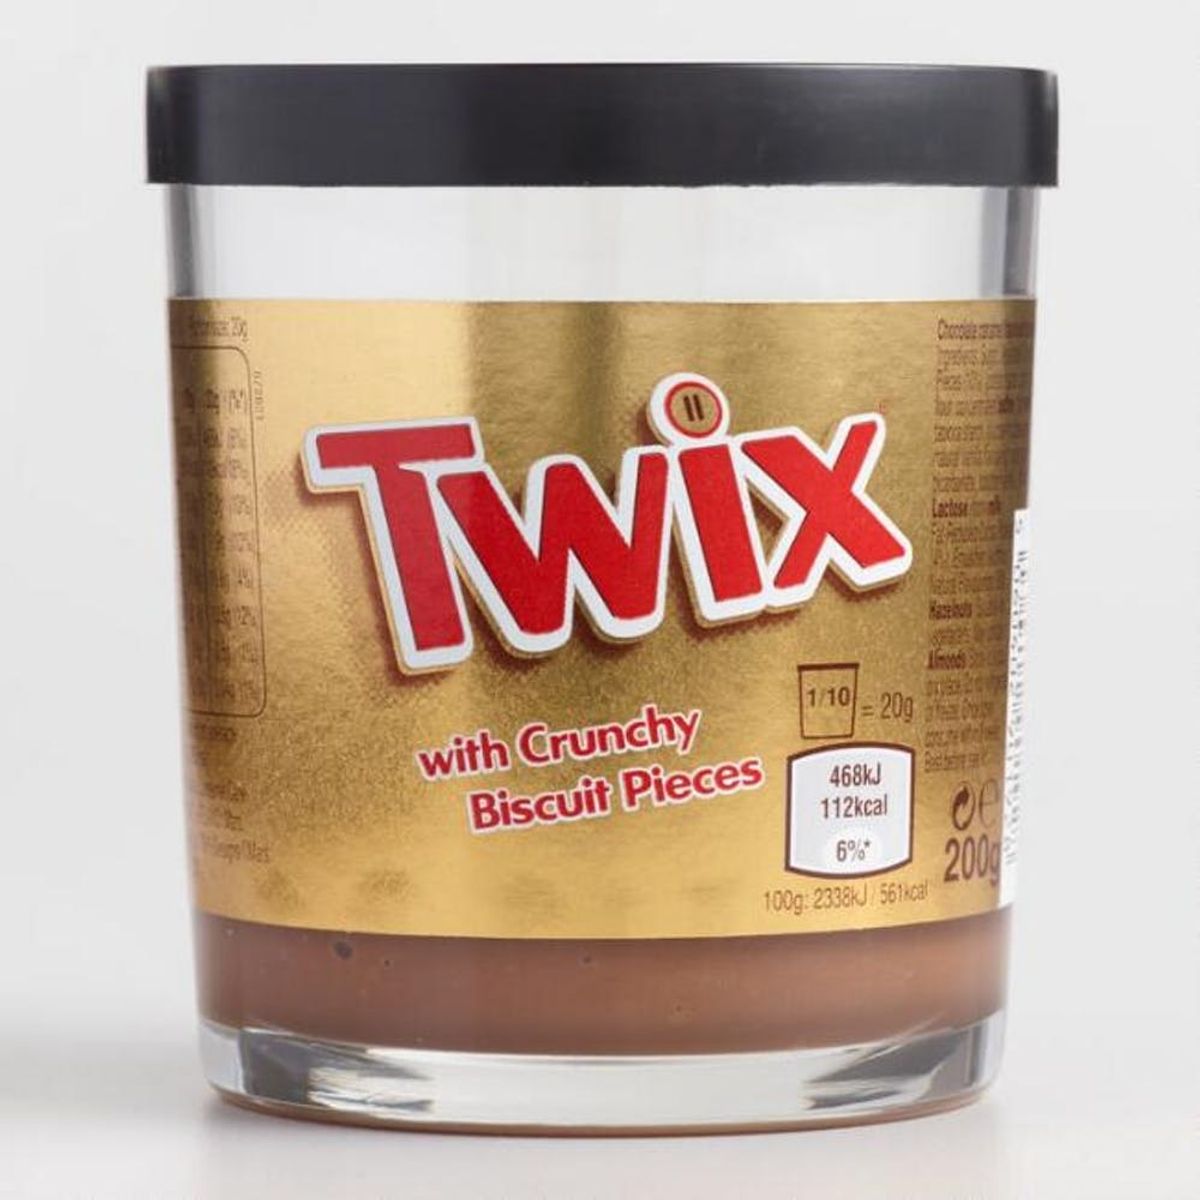 Twix Spread Is the Snack You Didn’t Know You Were Missing